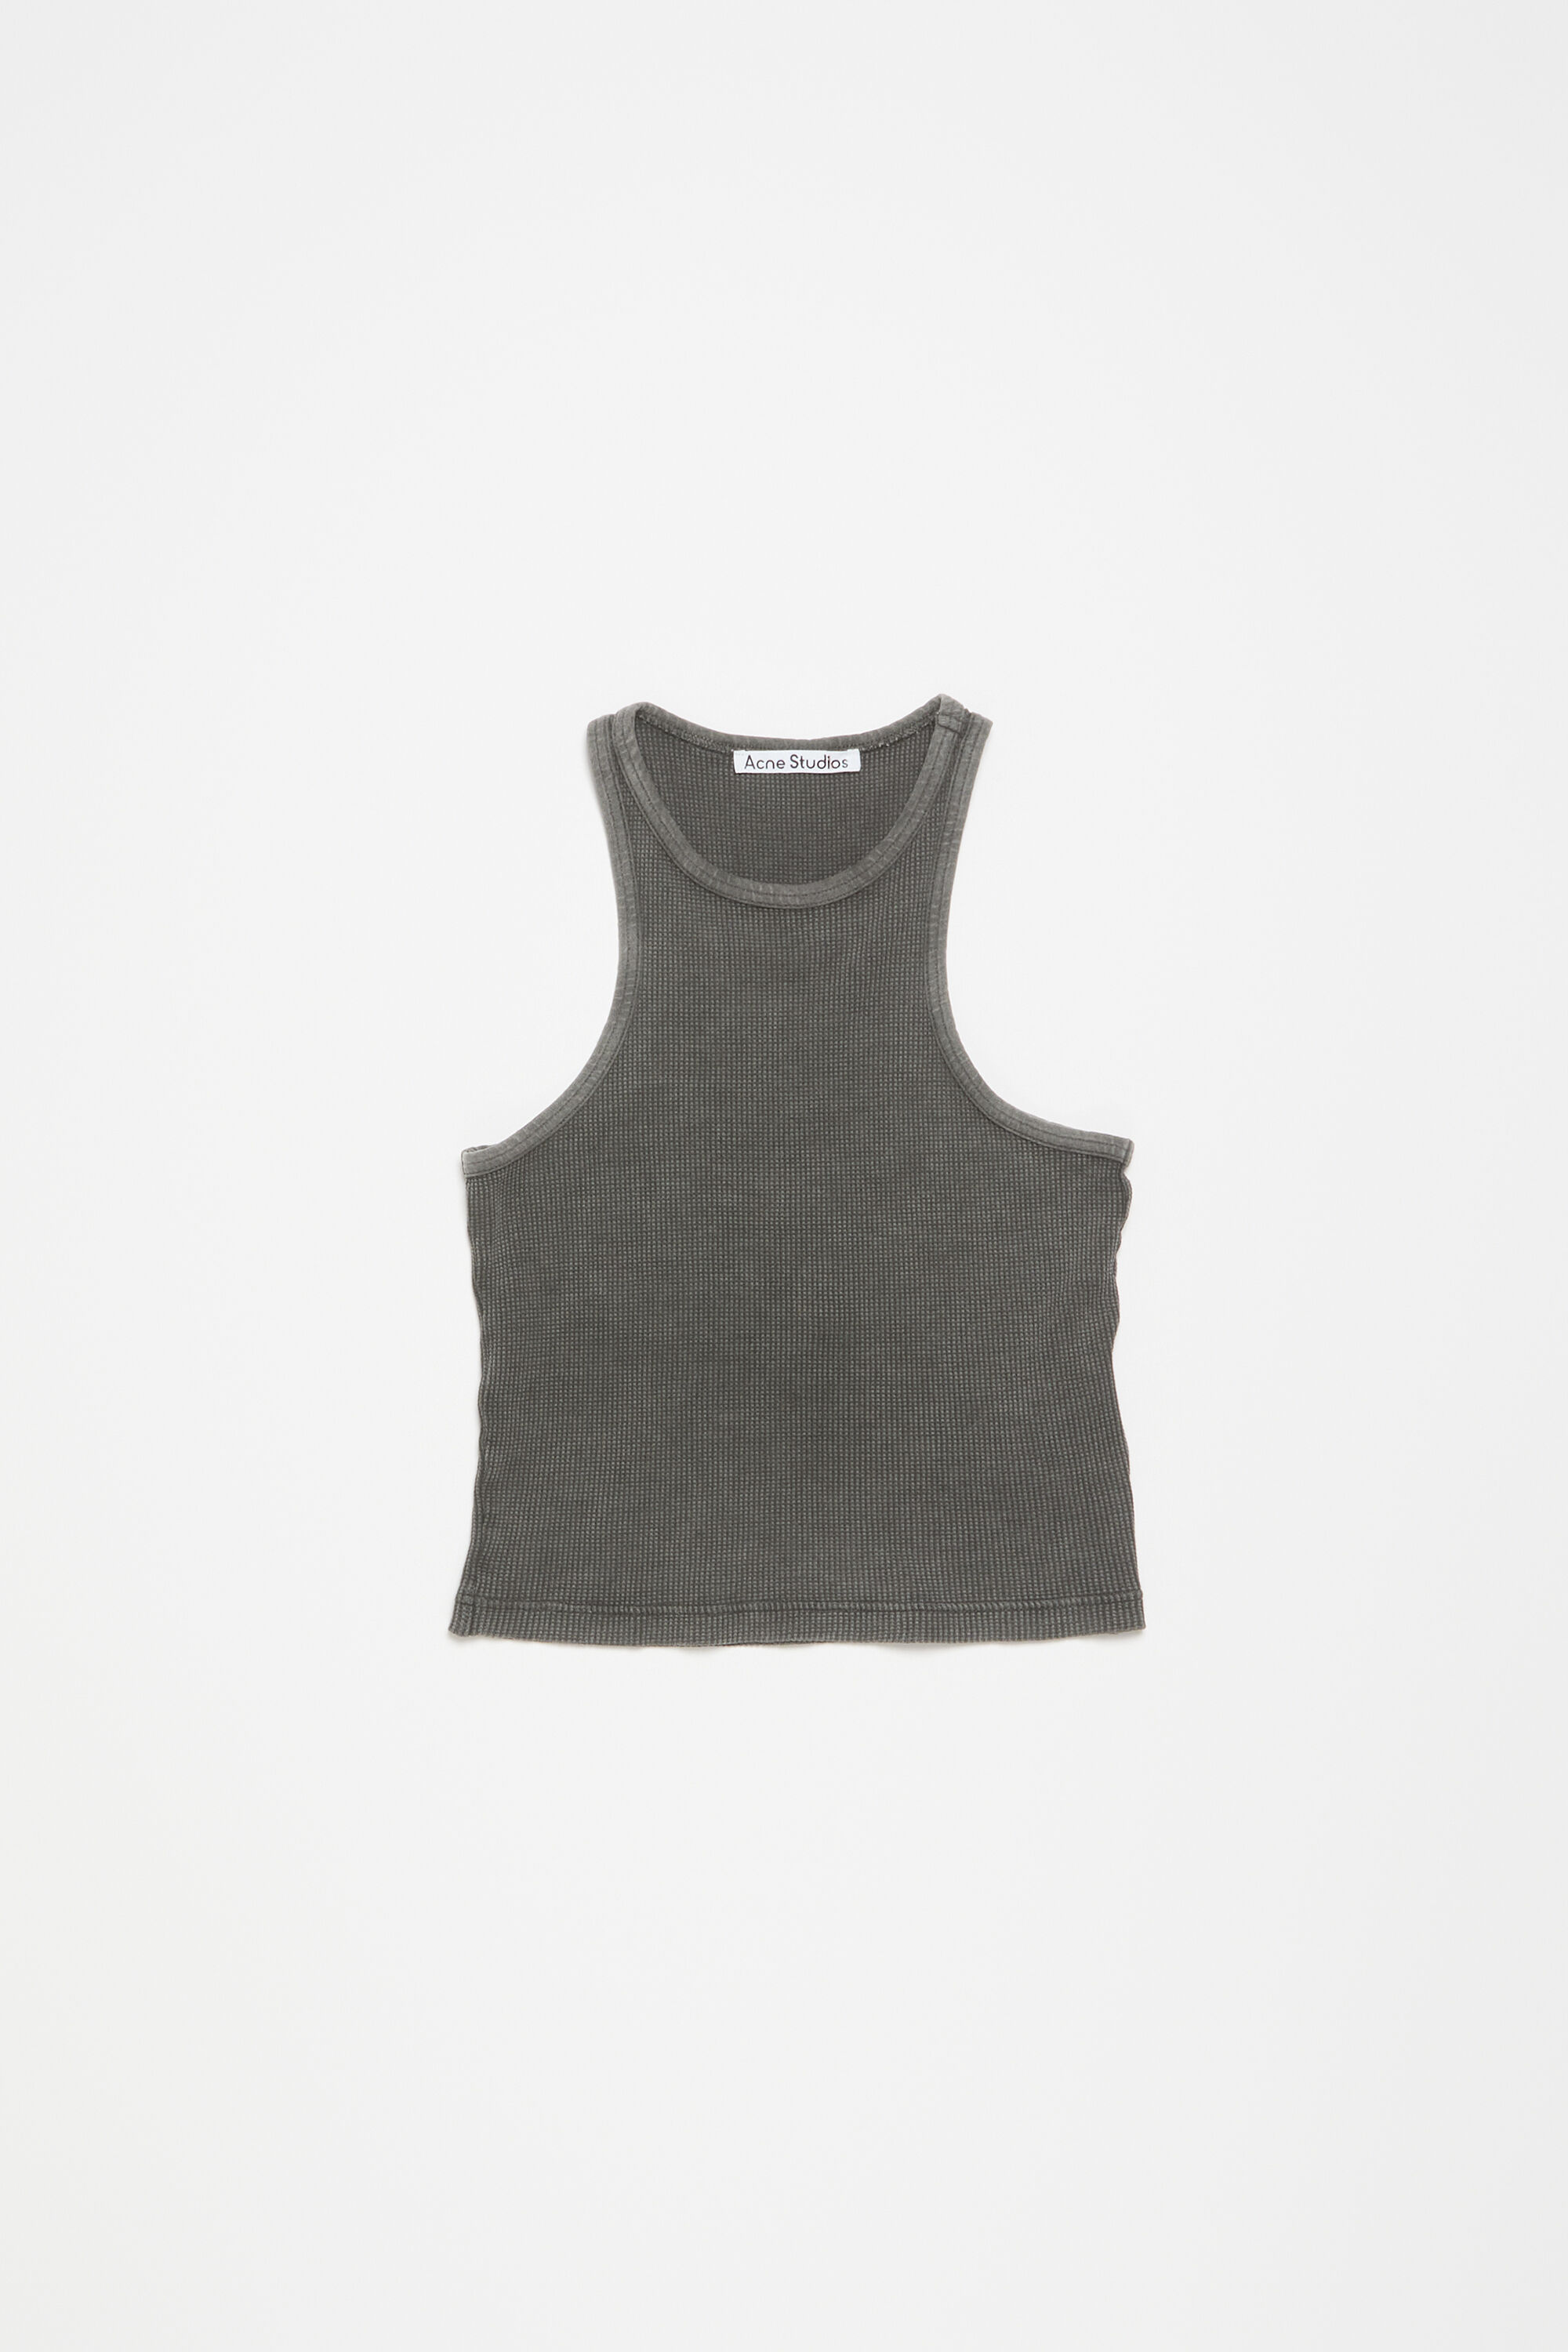 Acne Studios - Tank top - Fitted unisex fit - Faded Grey